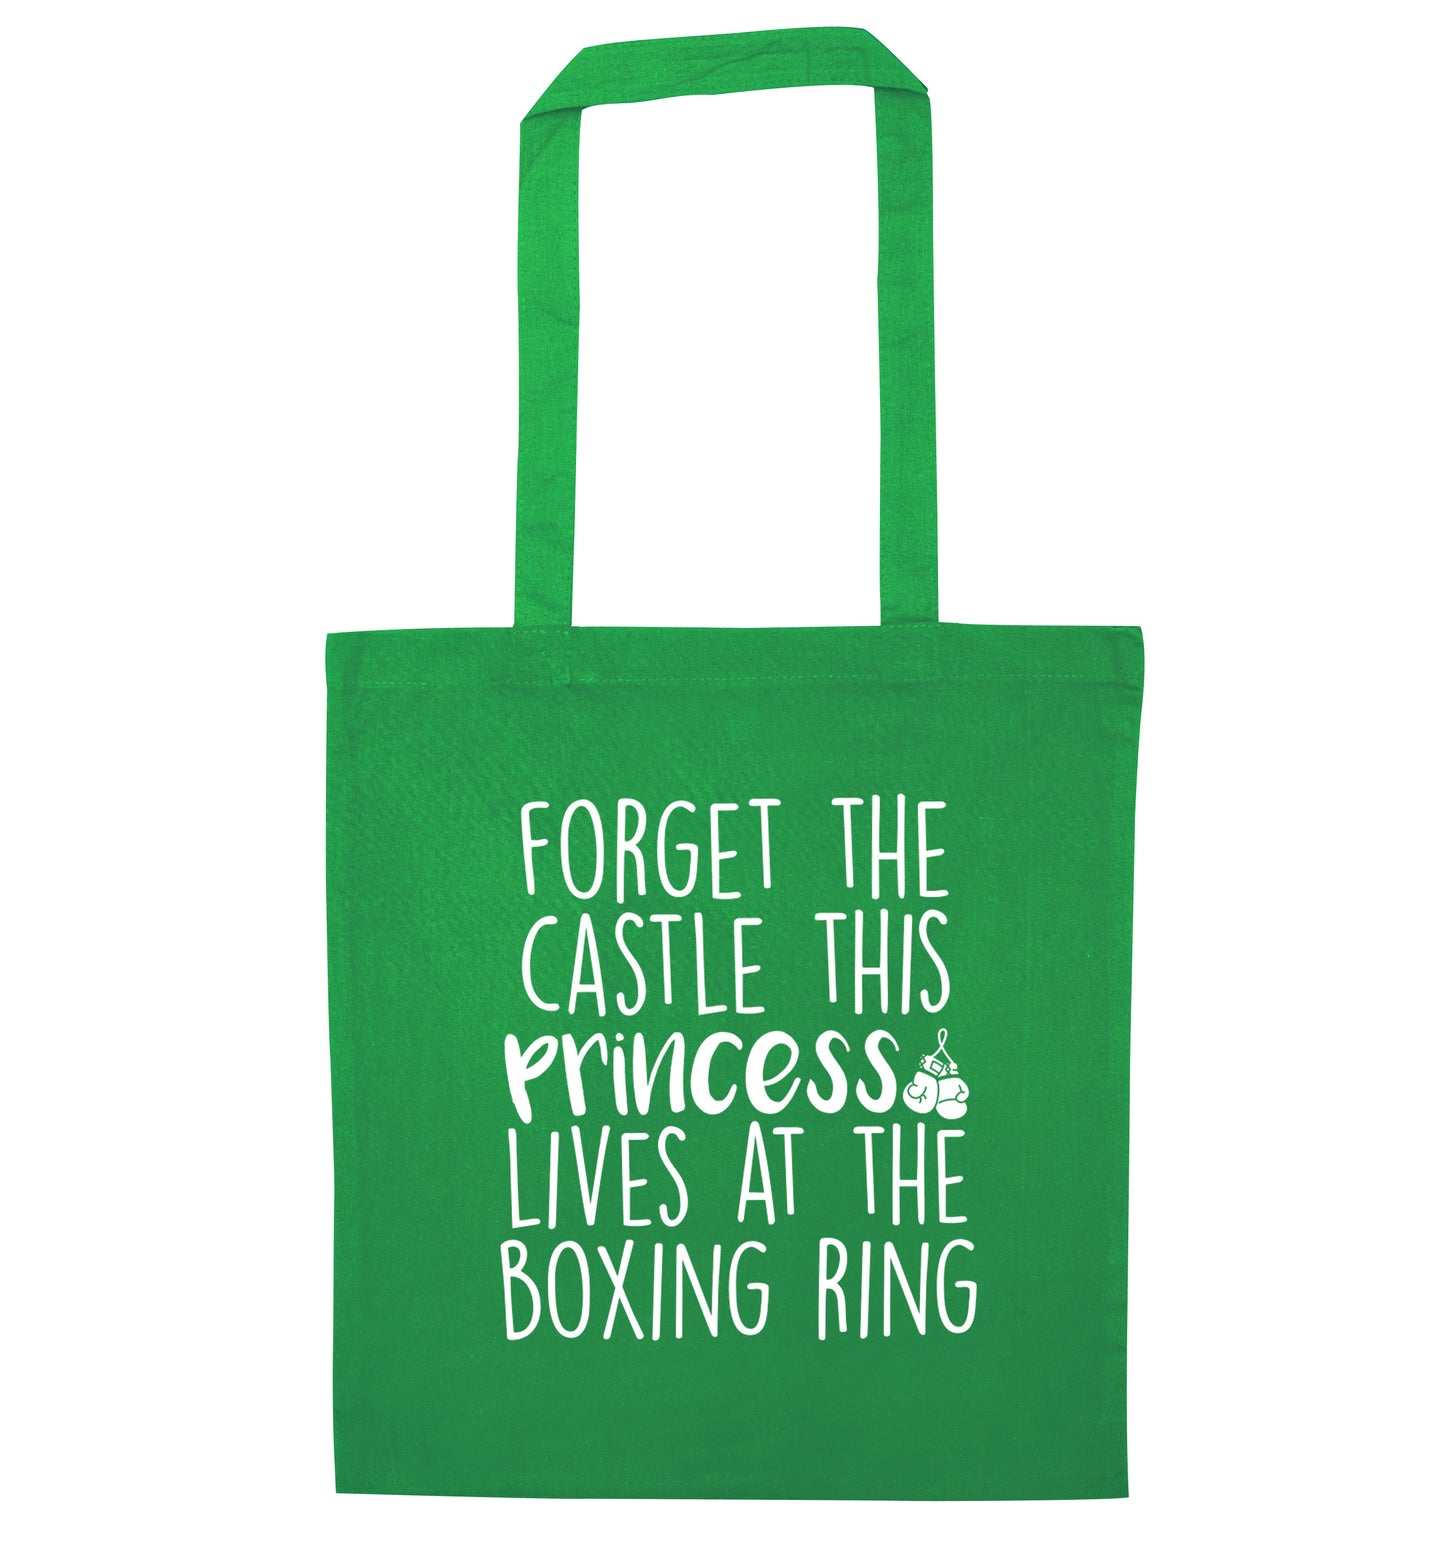 Forget the castle this princess lives at the boxing ring green tote bag